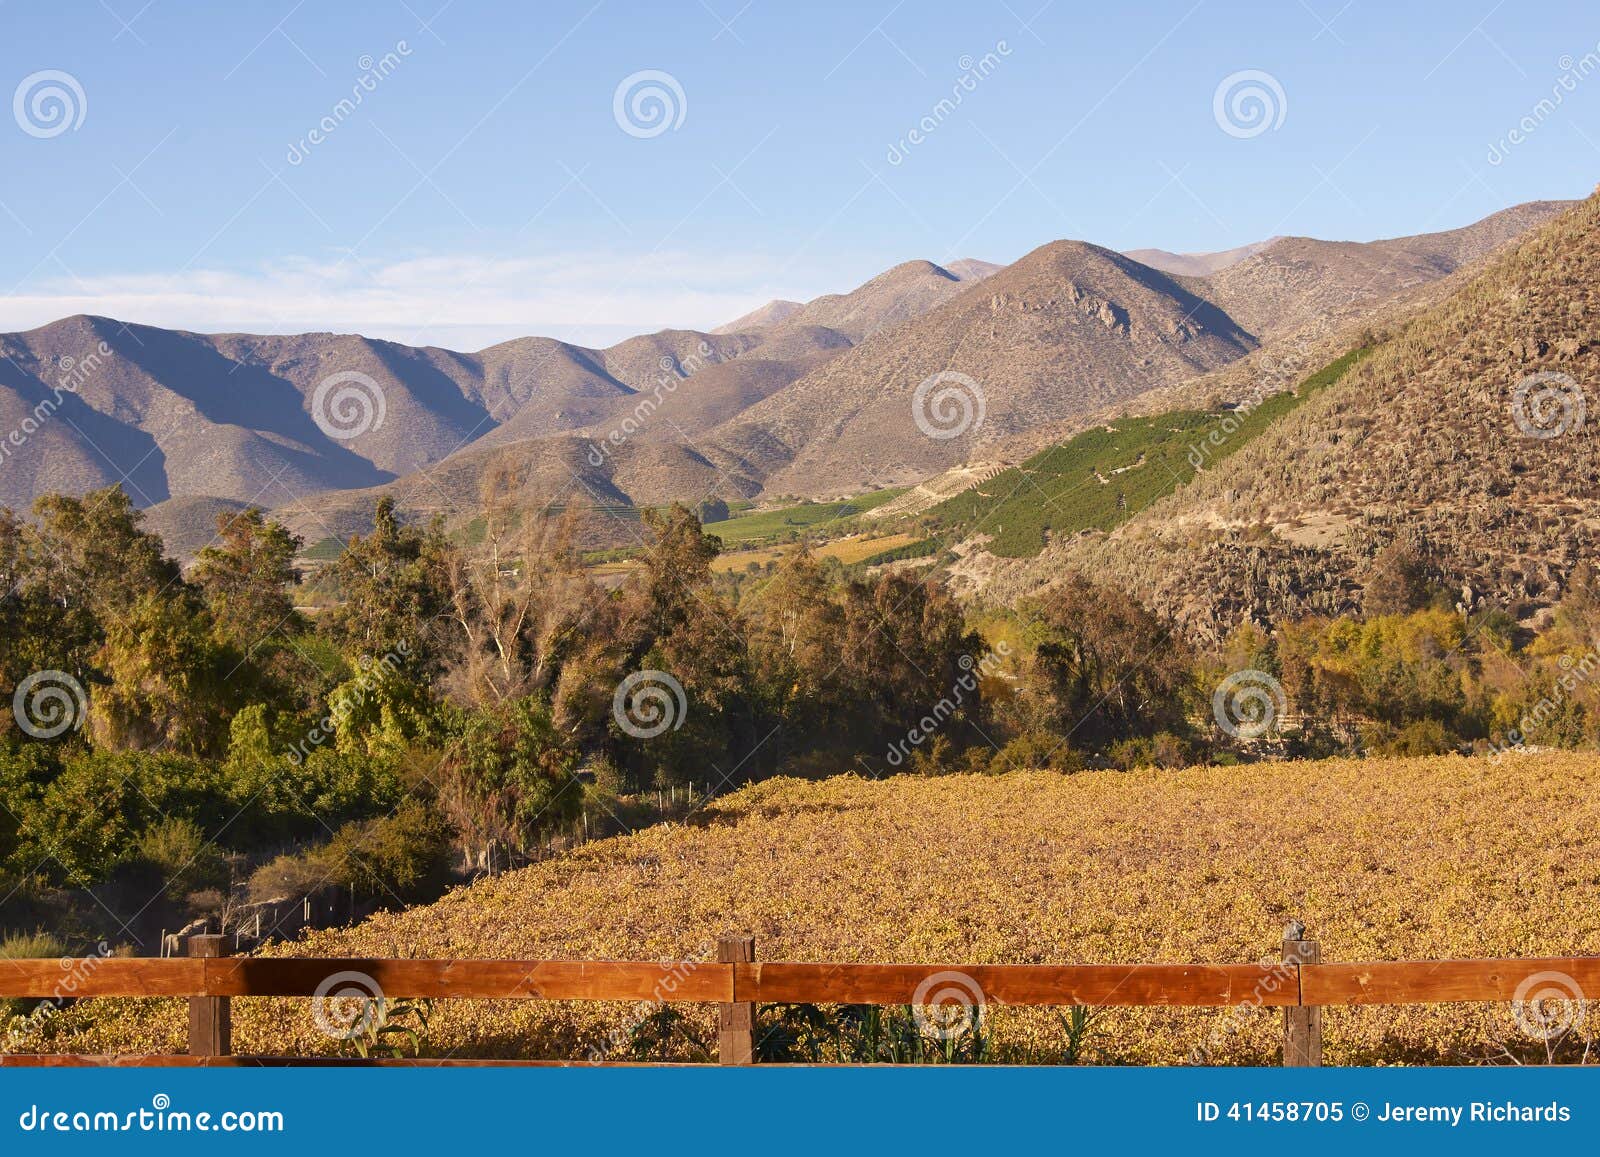 vineyards of chile